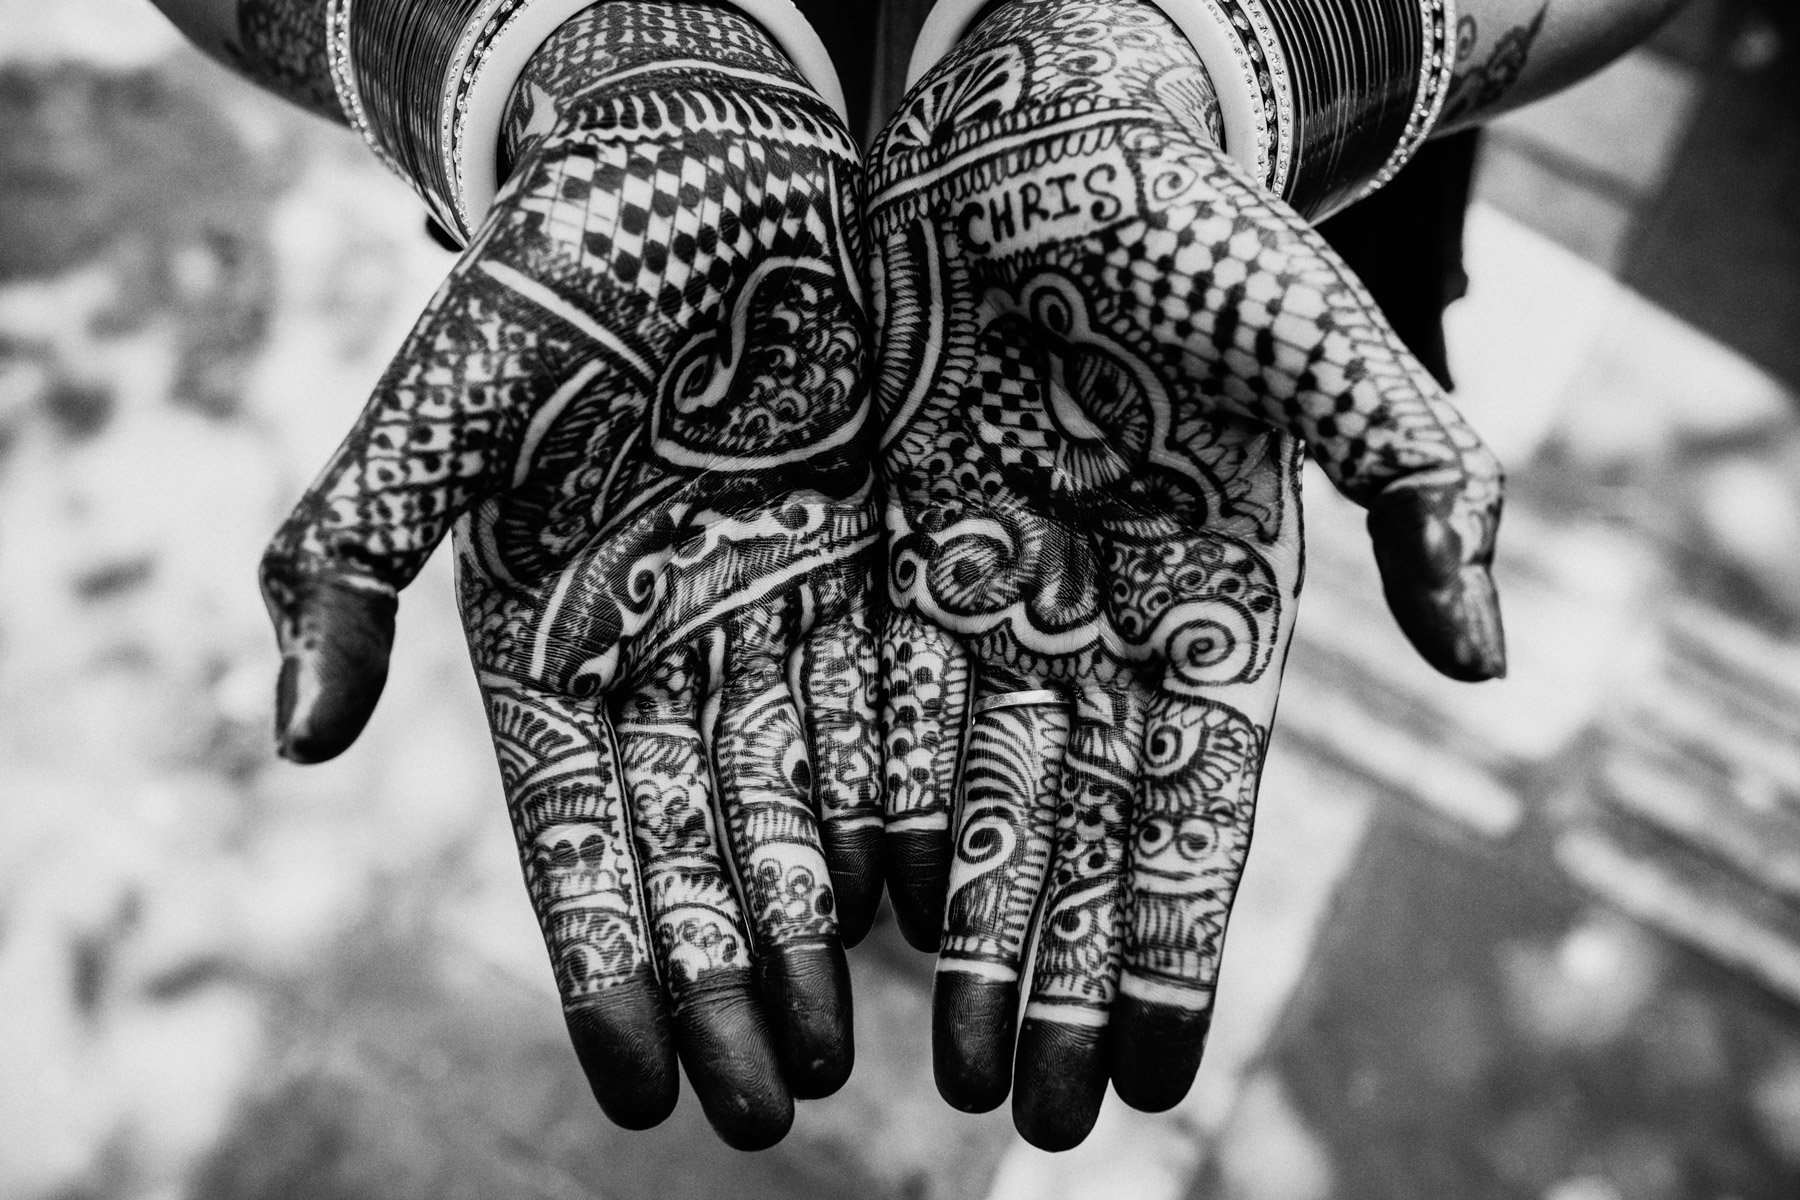 A young bride's Henna'd hands bearing her husband's name in Delhi, India.